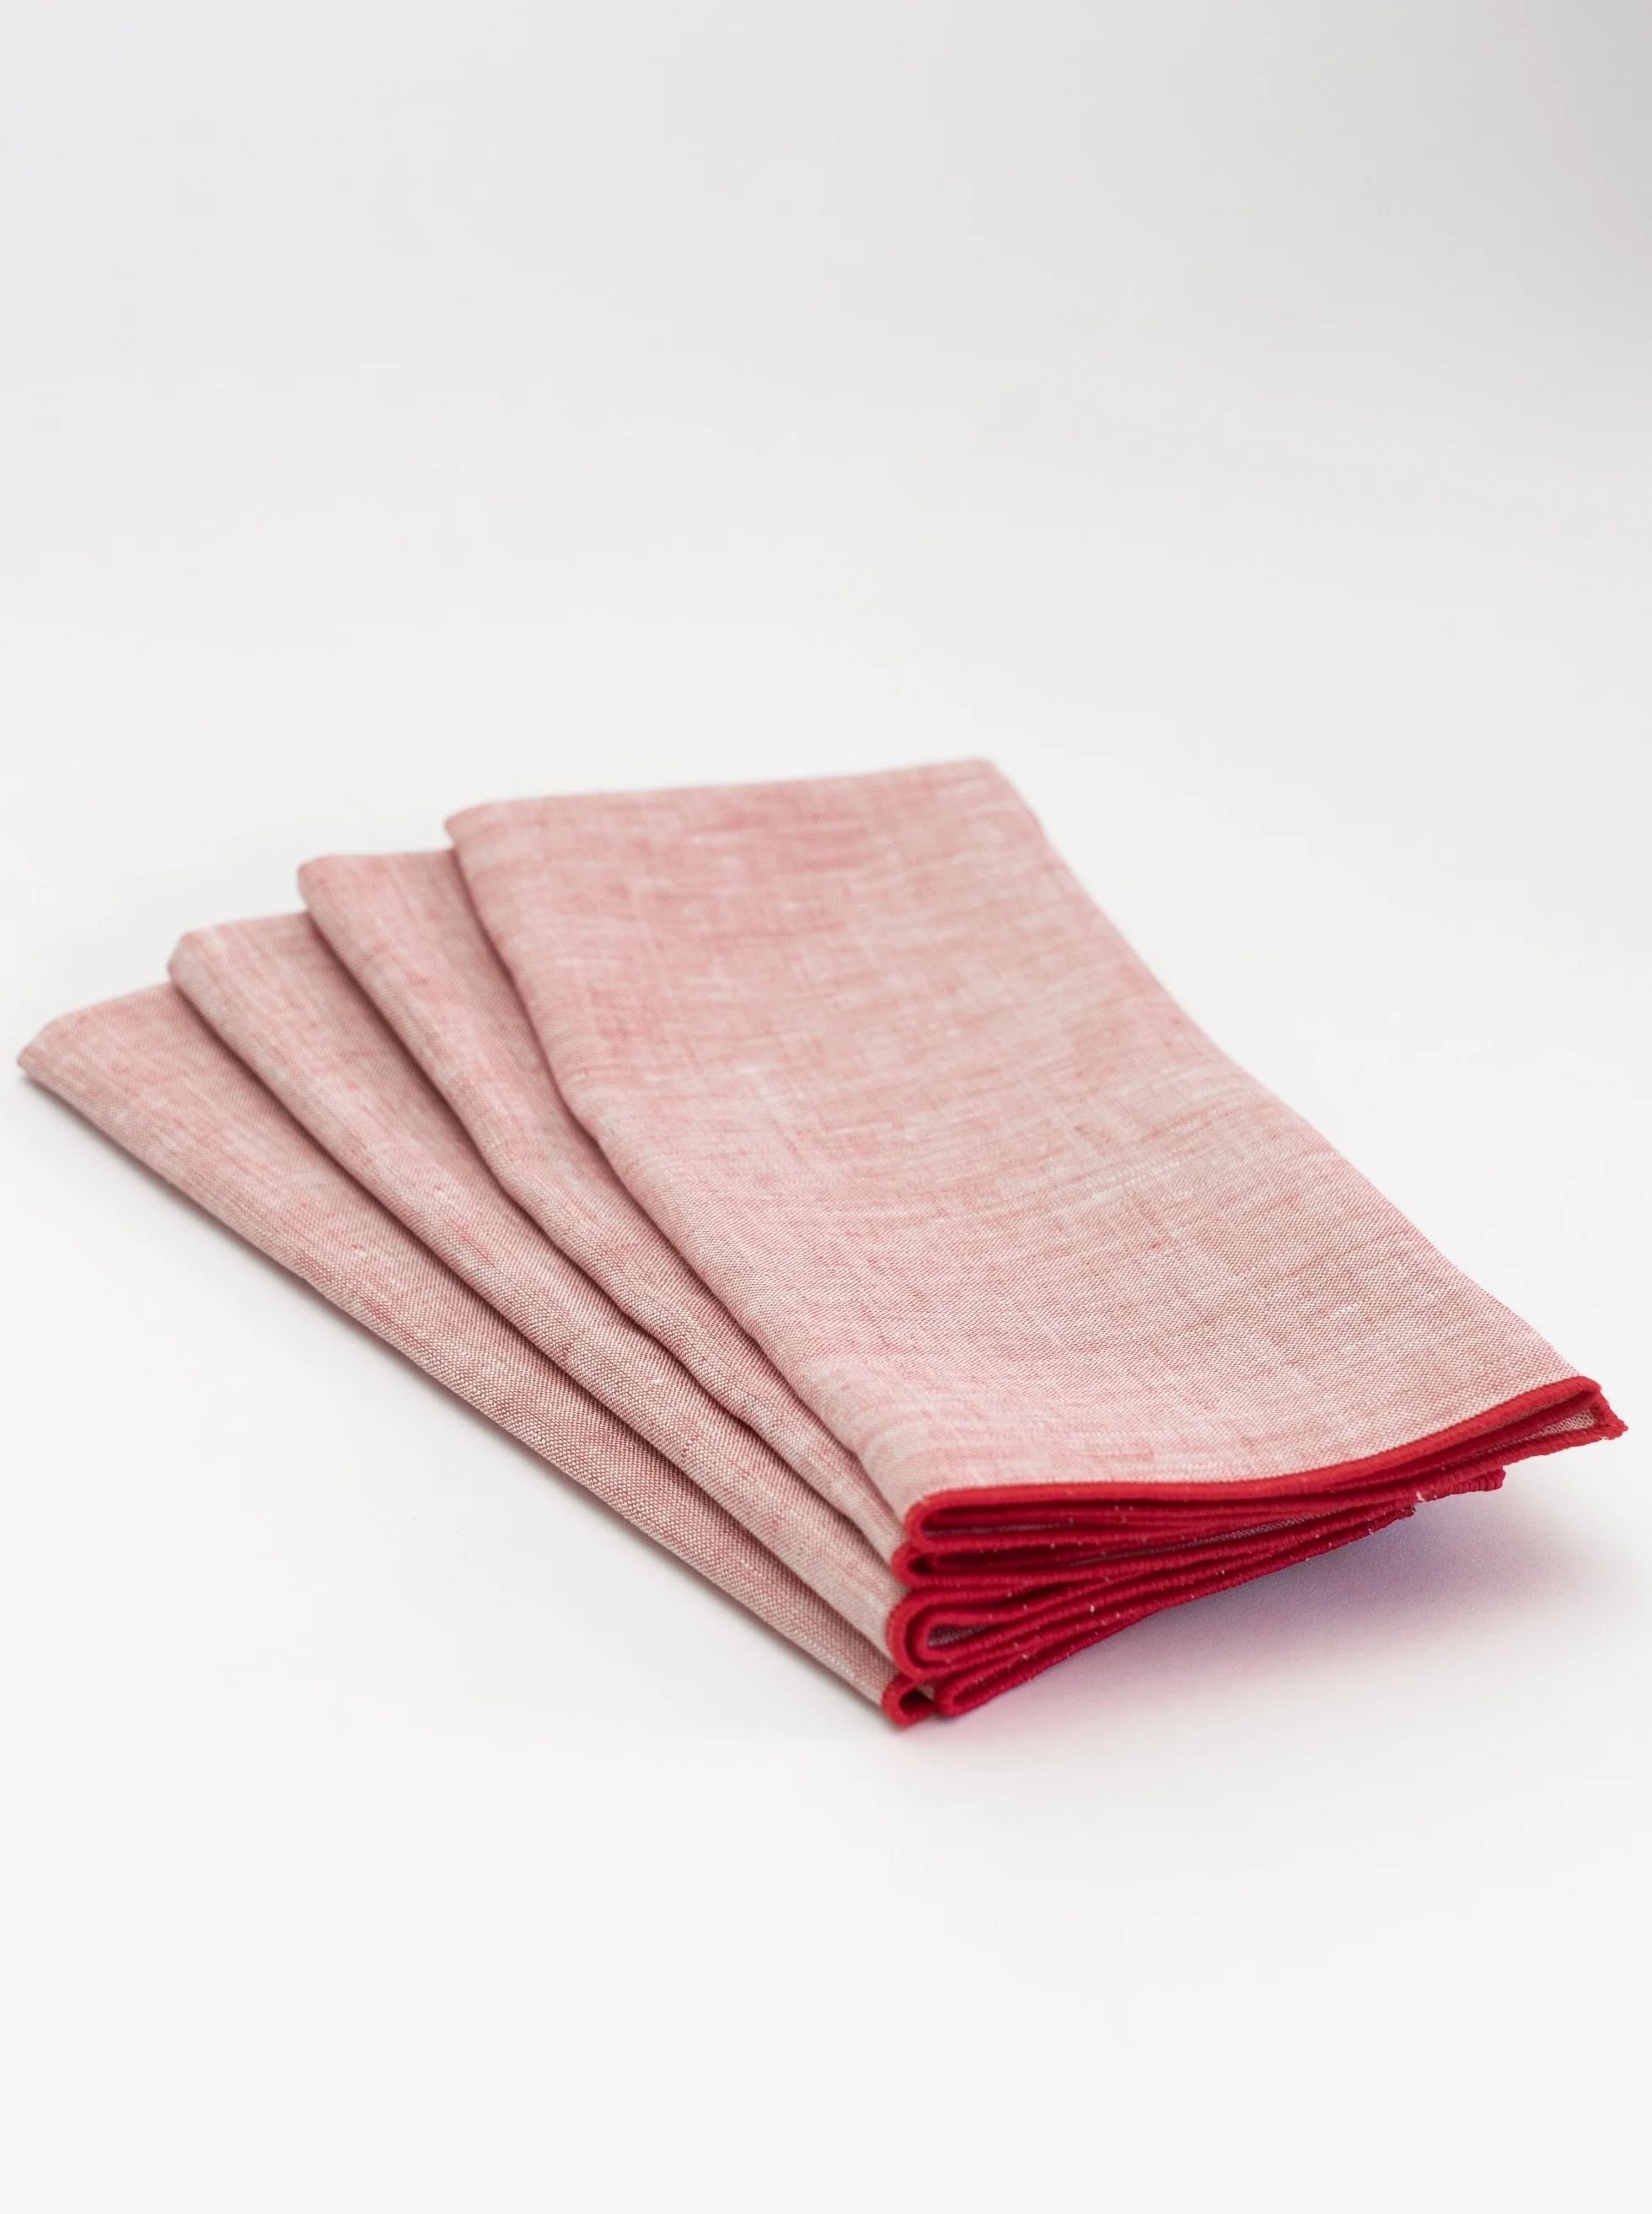 Waller Red Chambray Napkin Set | Proper Table Co.